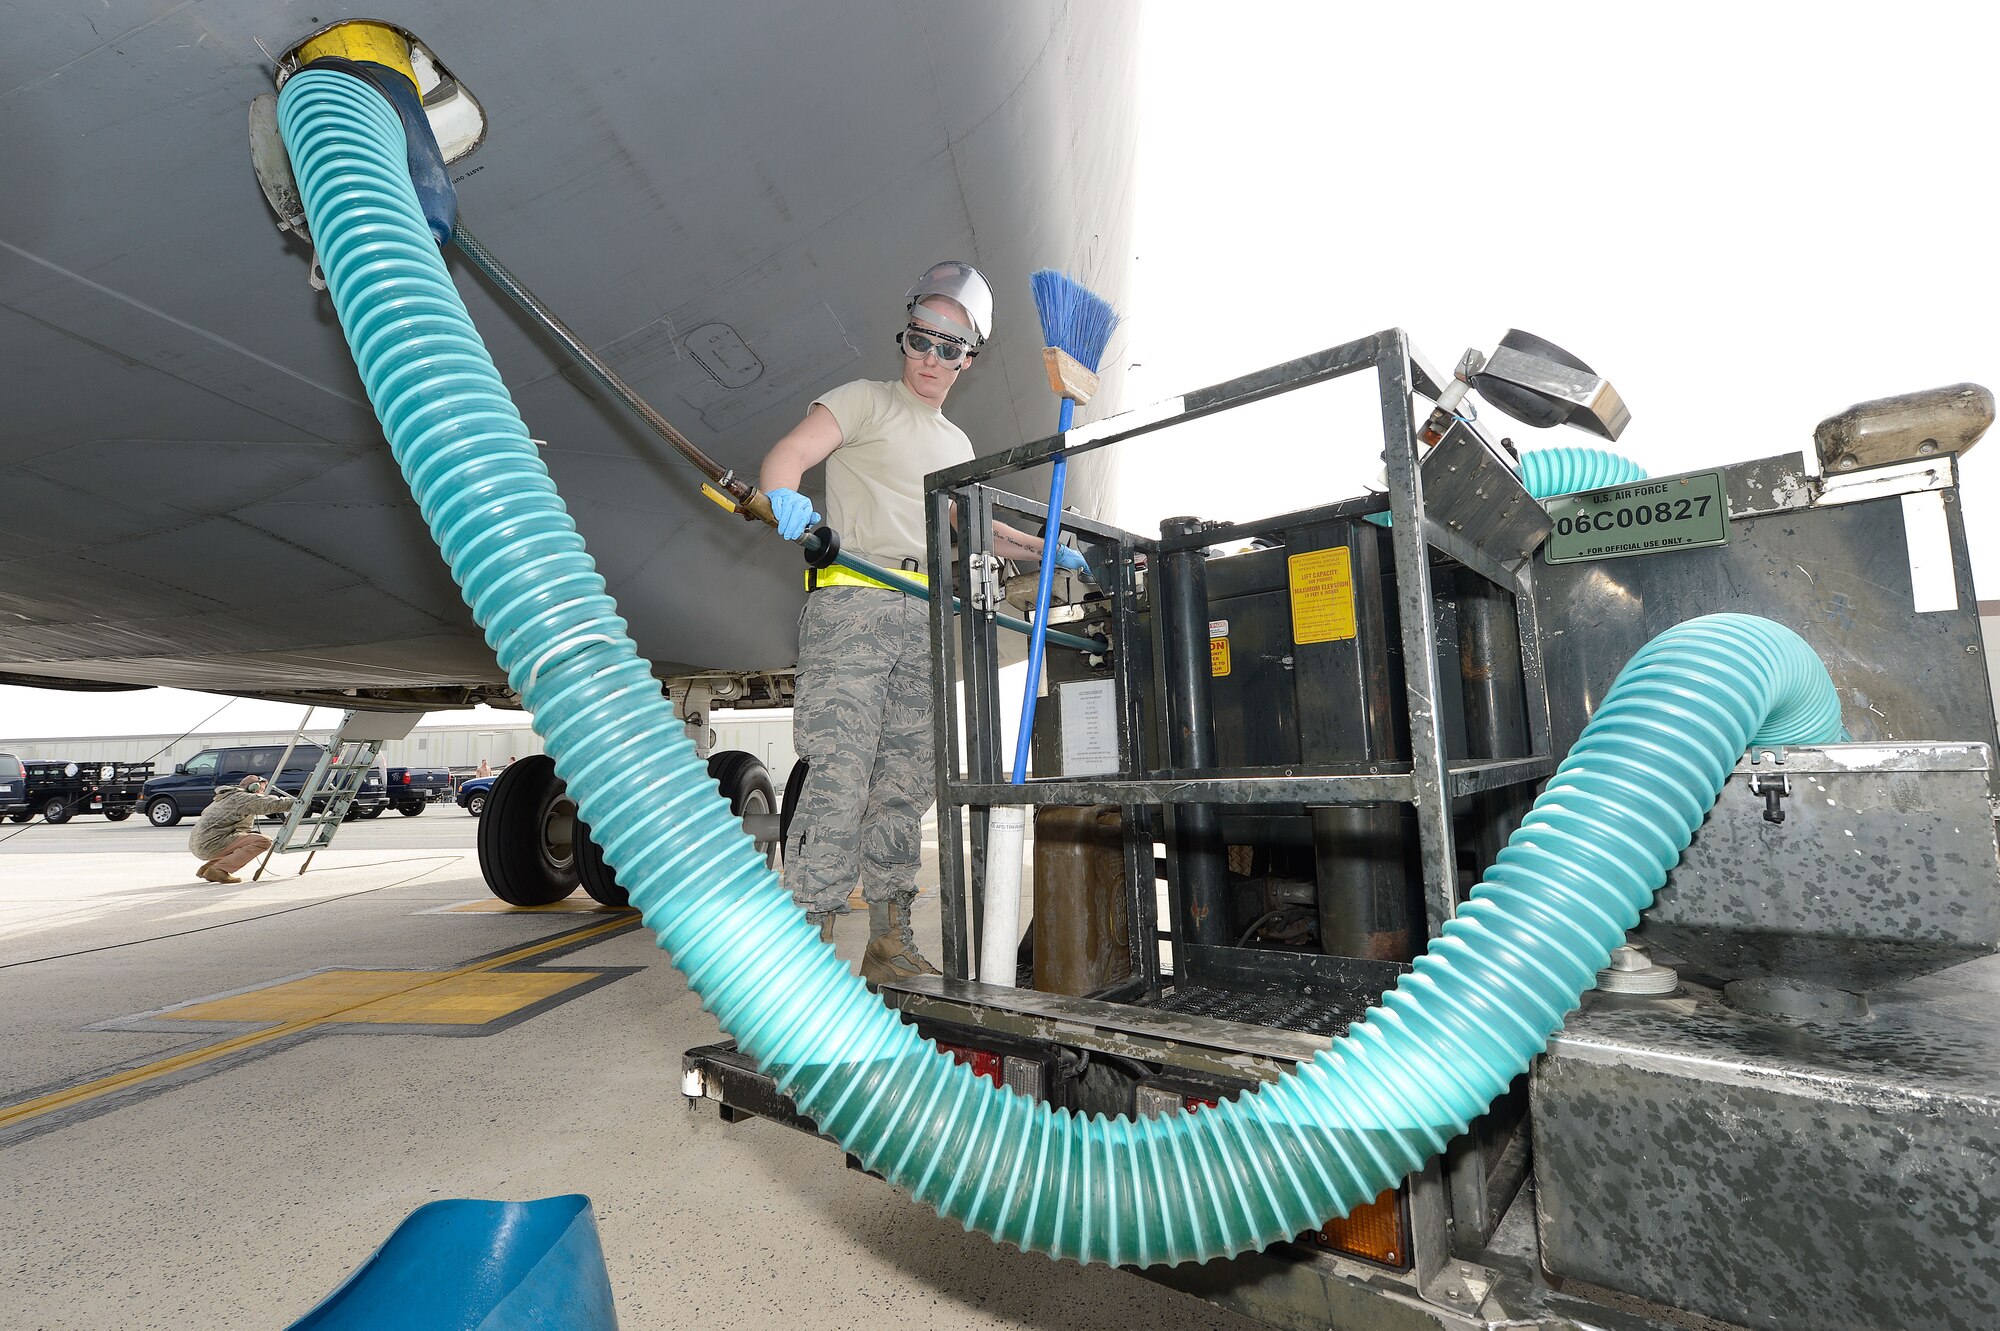 Airman 1st Class Robert Stemmler monitors the transfer of lavatory waste from a C-5A Galaxy to a fleet servicing pump truck immediately after the aircraft has landed, March 11, 2013, Dover Air Force Base, Del. The C-5A Galaxy from the 167th Airlift Wing, West Virginia Air National Guard, has just returned from a mission overseas and will be fully serviced and quickly returned to service by professionals, like A1C Stemmler, of the the 436th Aerial Port Squadron, fleet services section. (U.S. Air Force photo/Greg L. Davis)